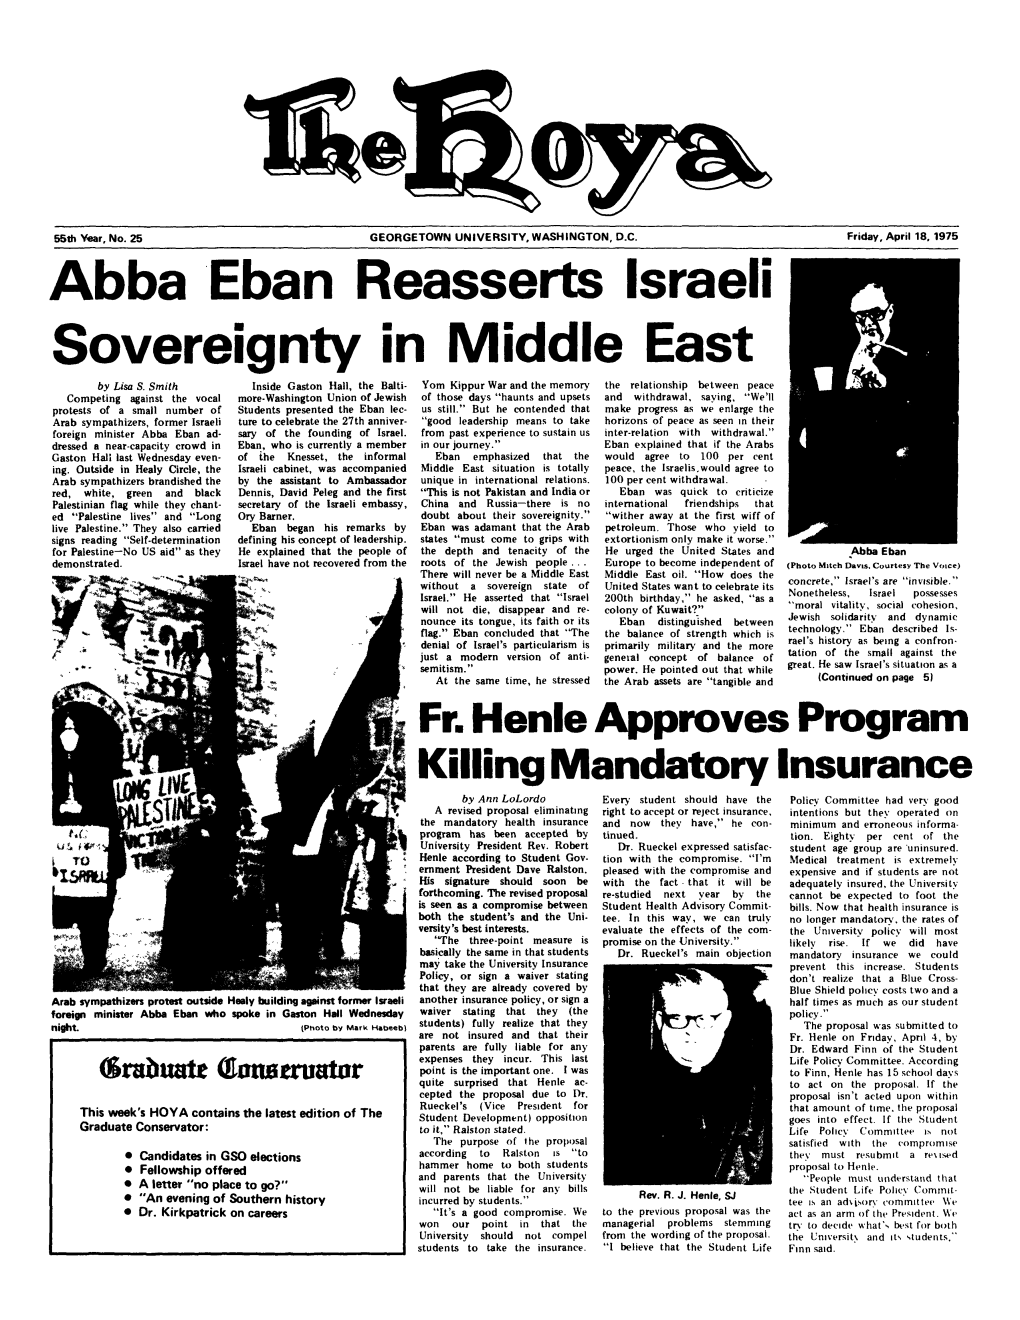 Abba Eban Reasserts Israeli Sovereignty in Middle East by Lisa S